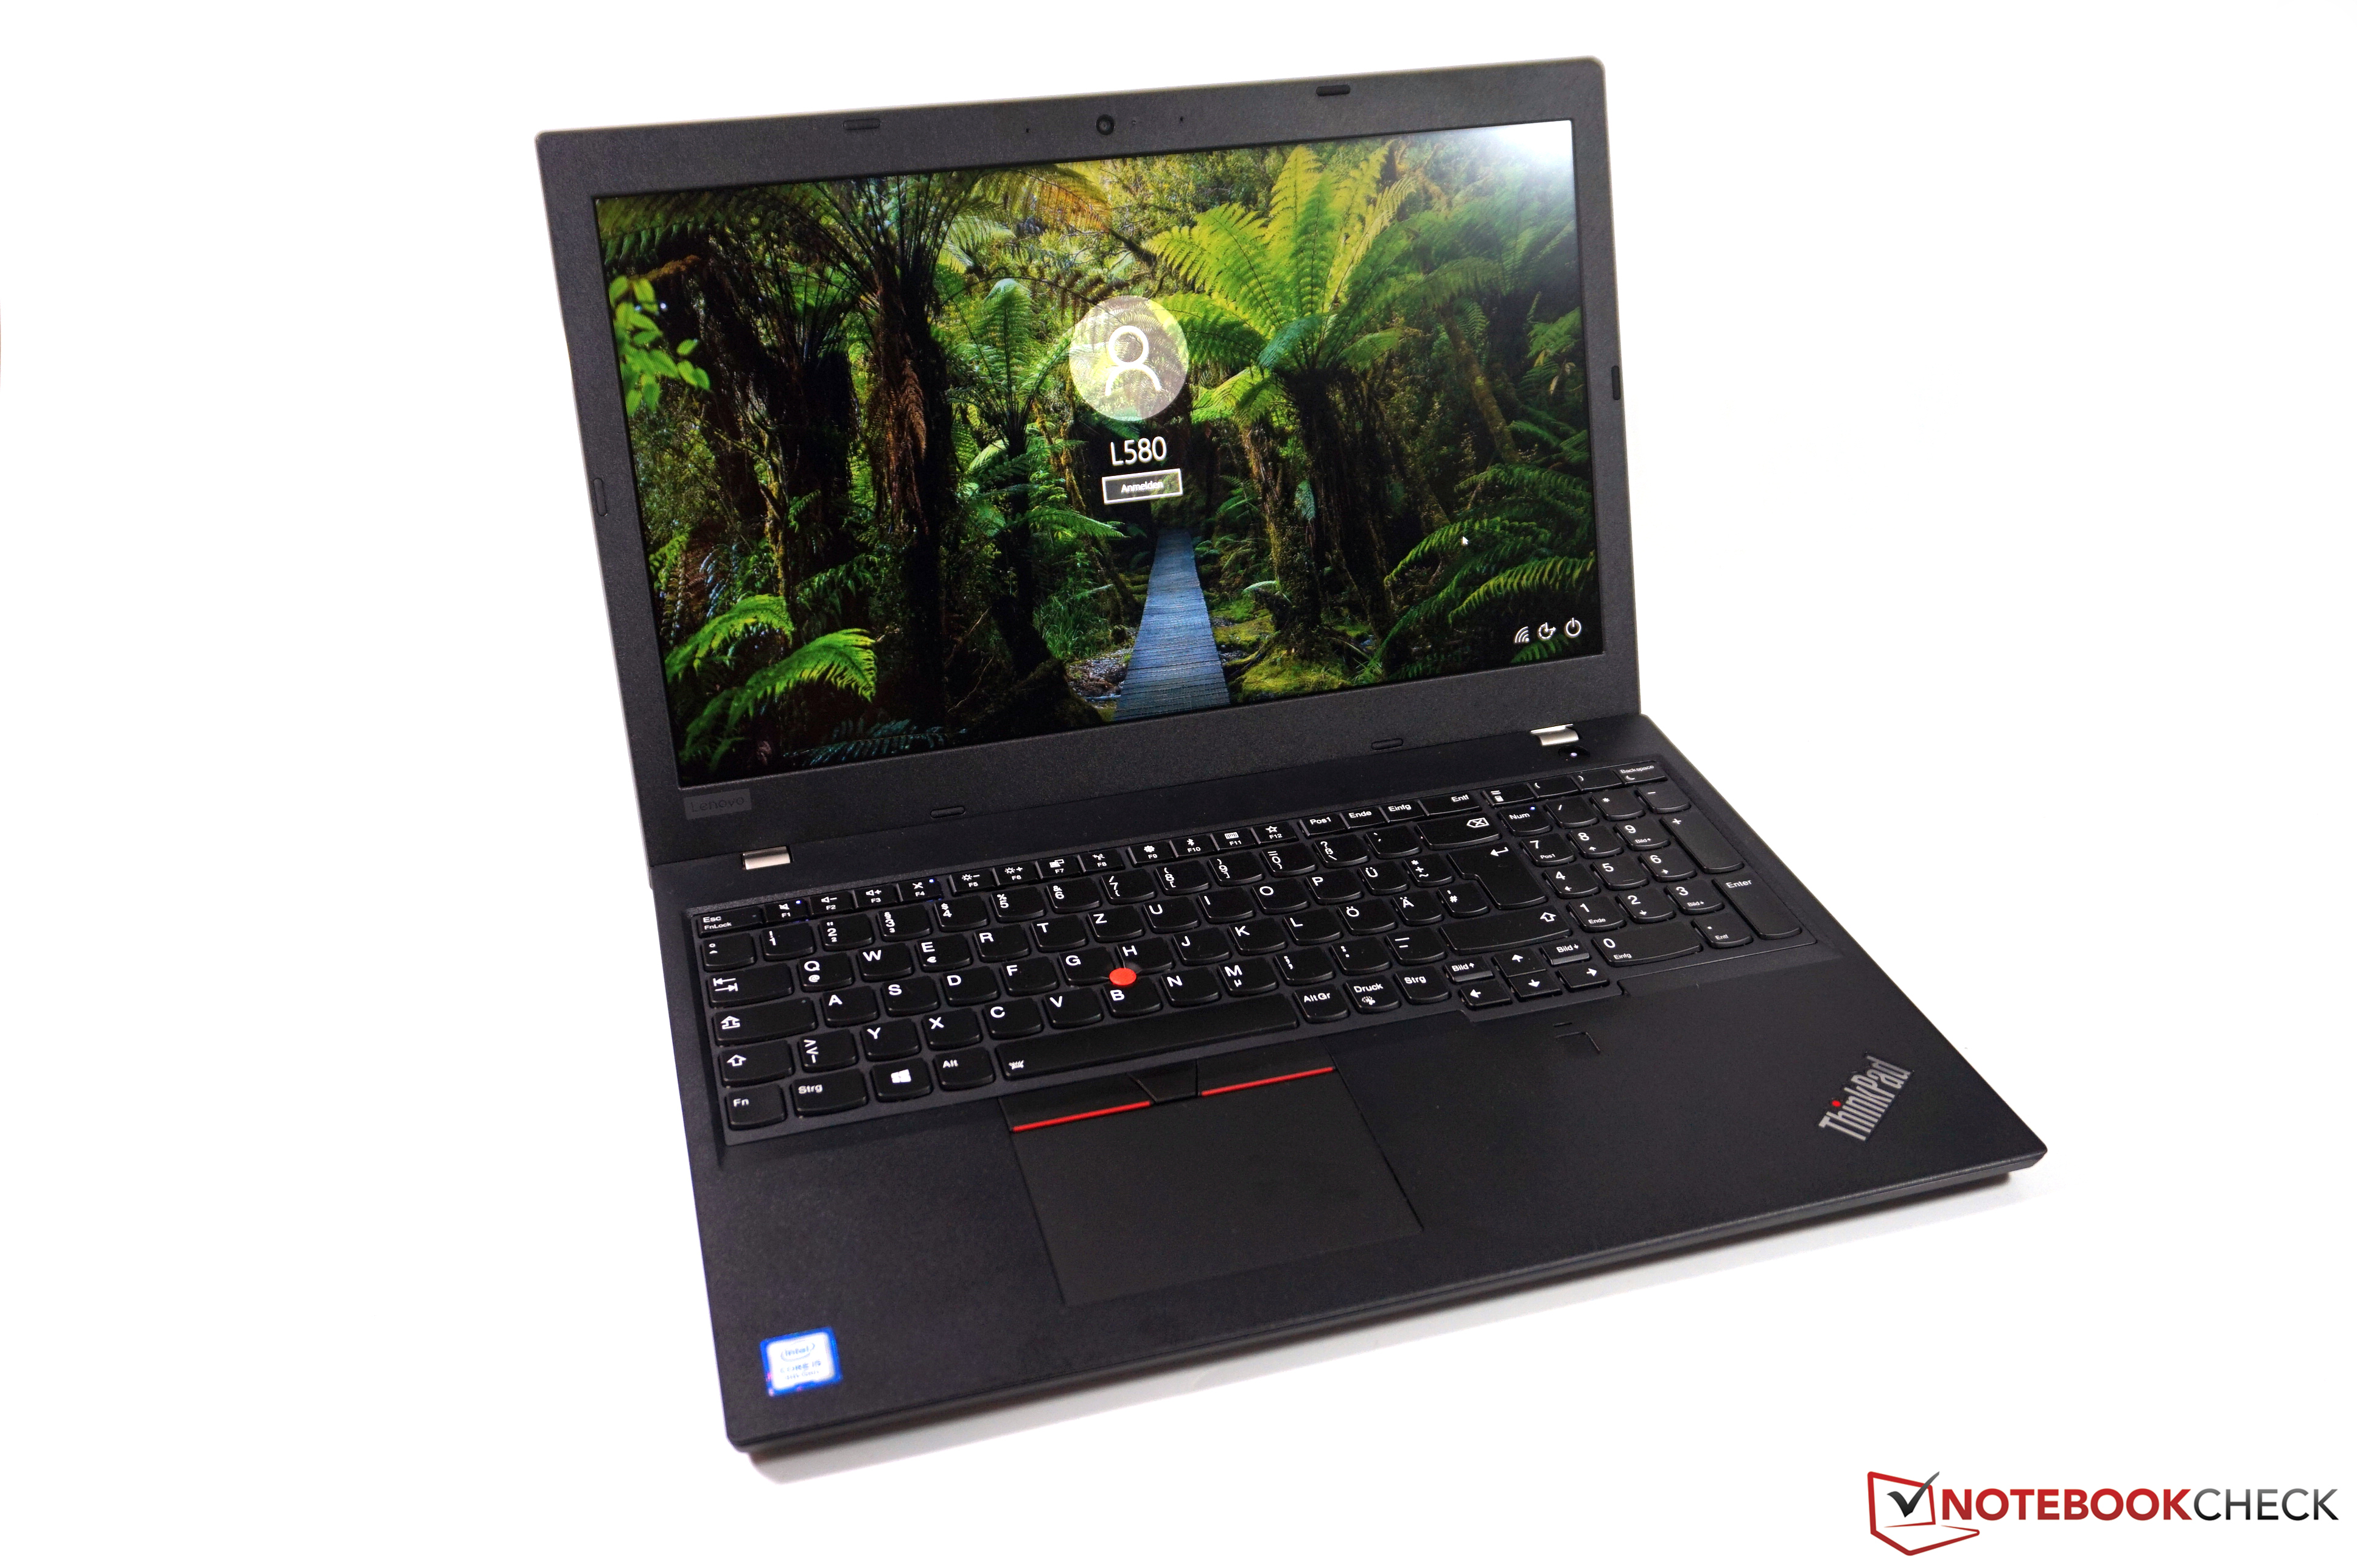 Lenovo ThinkPad L580 Laptop Review: Reliable office notebook with ...